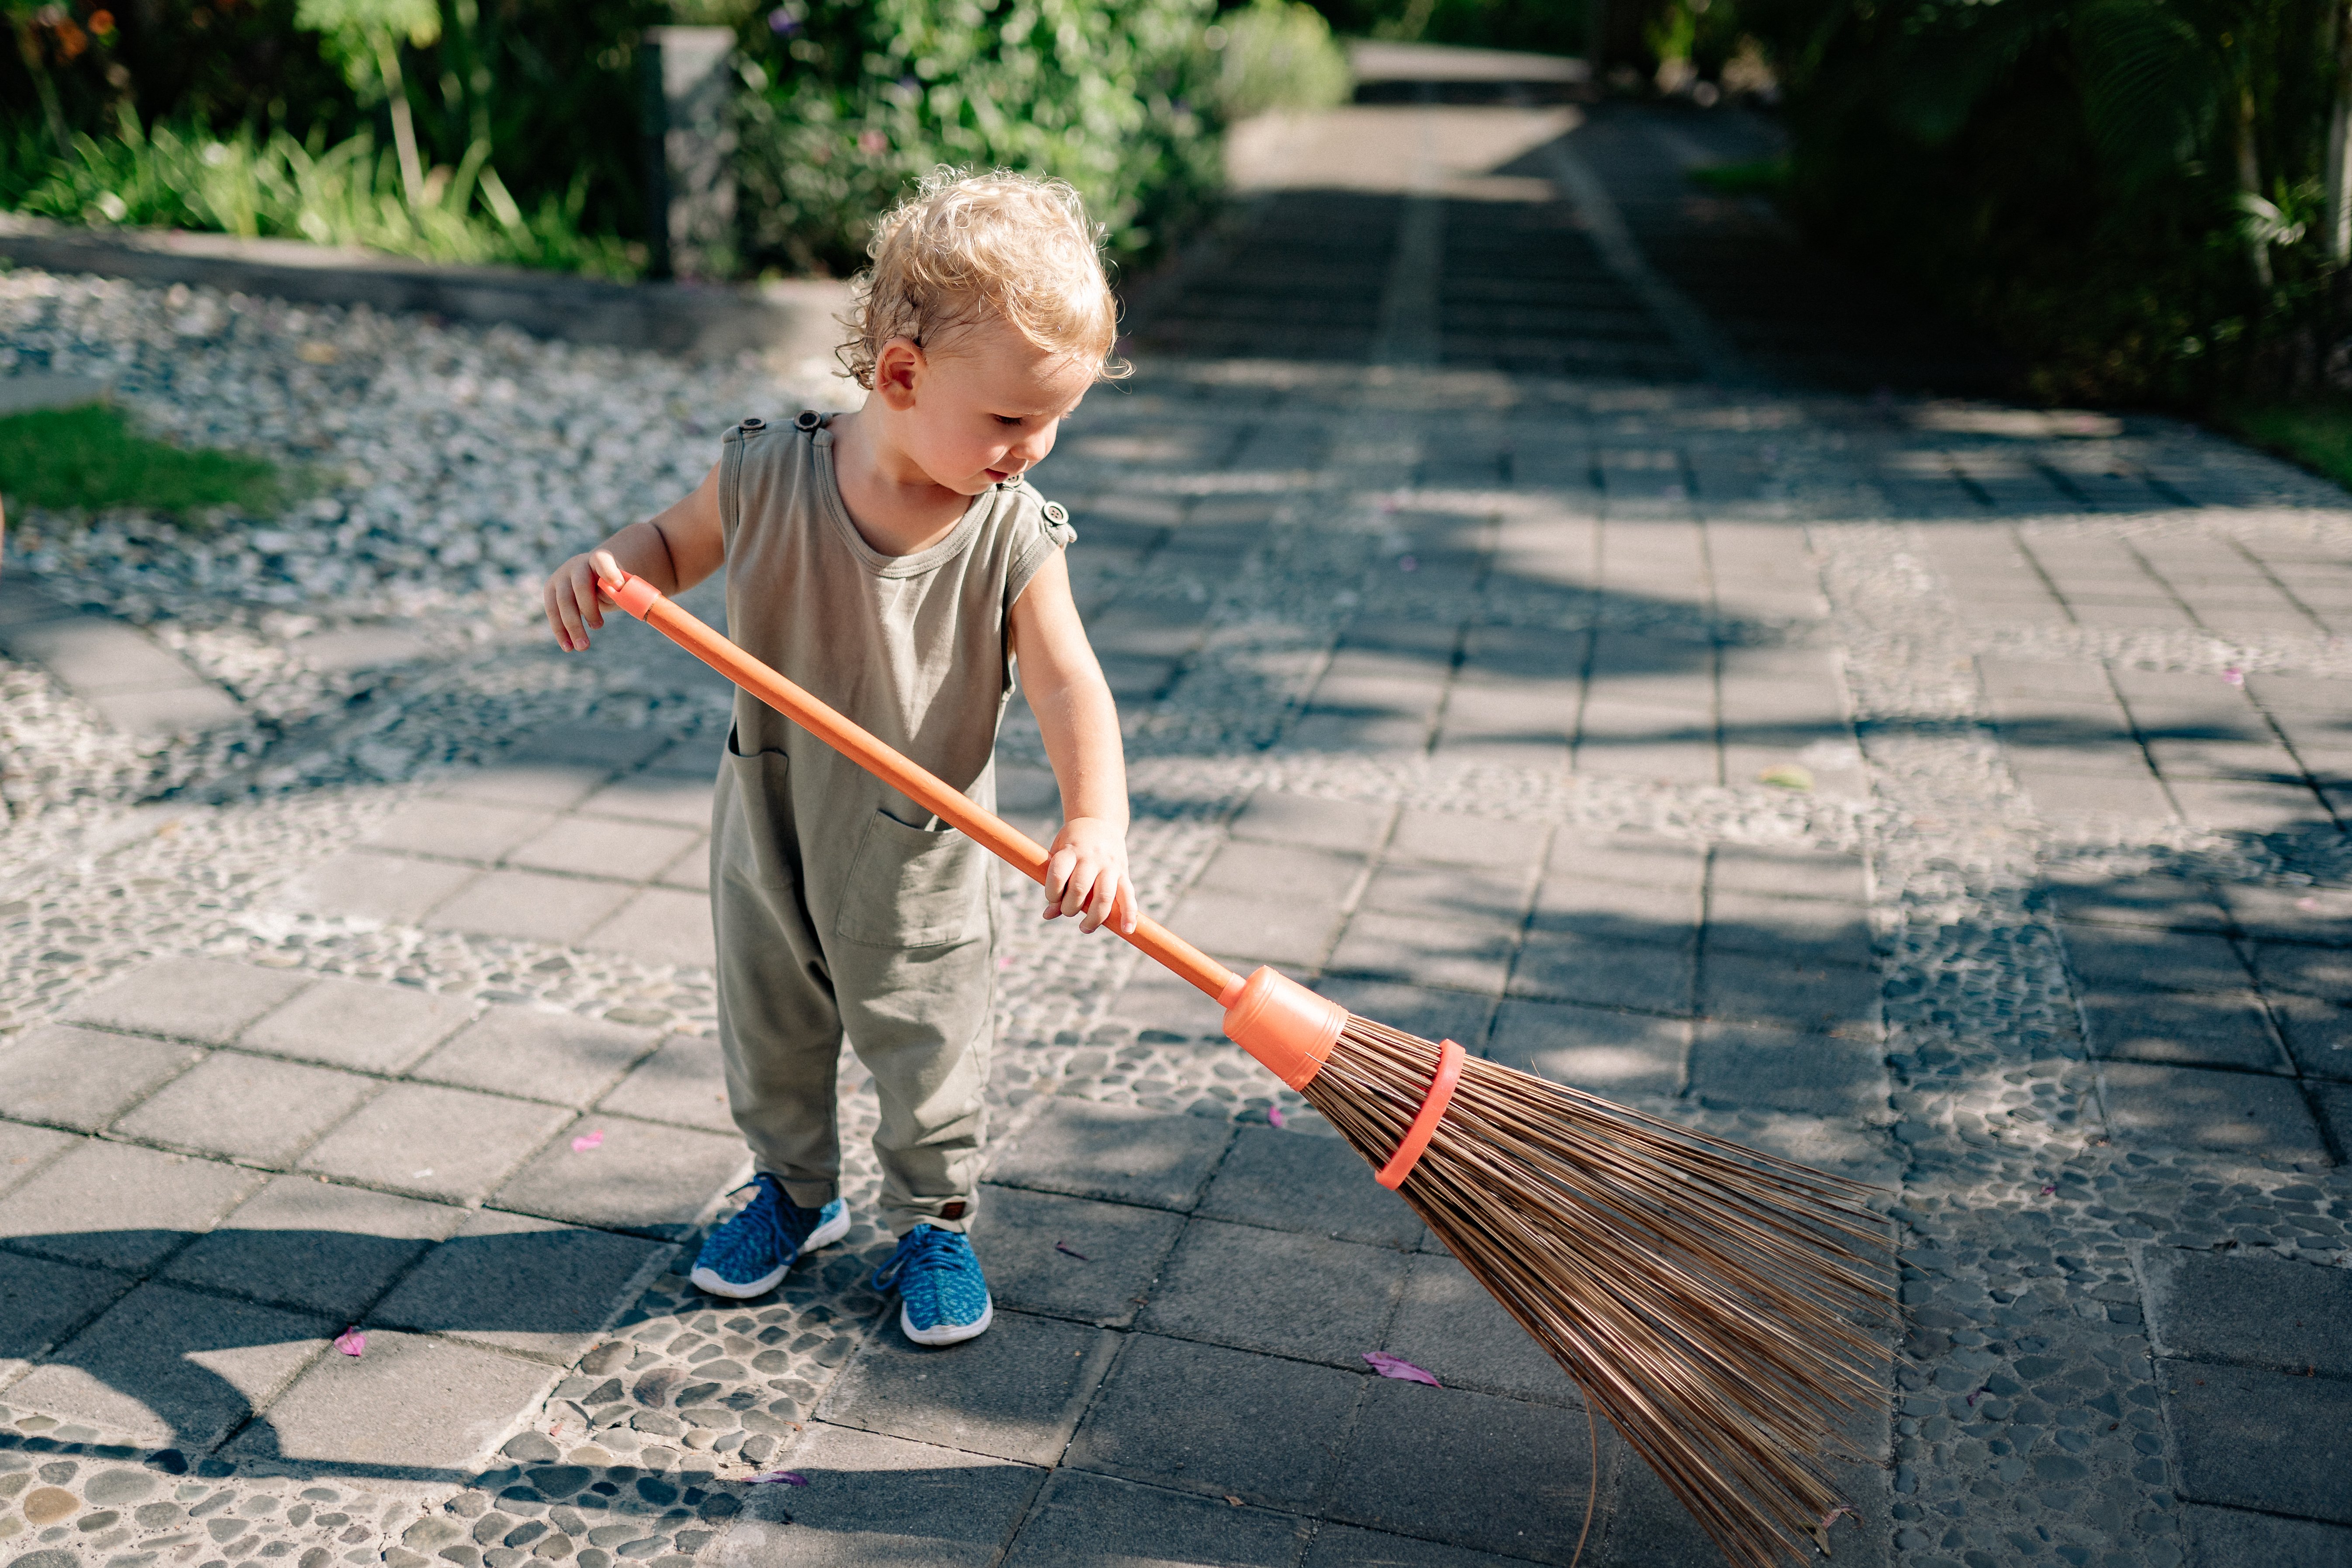 Charming Child Sweeping Concrete Pavement with Broomstick · Free